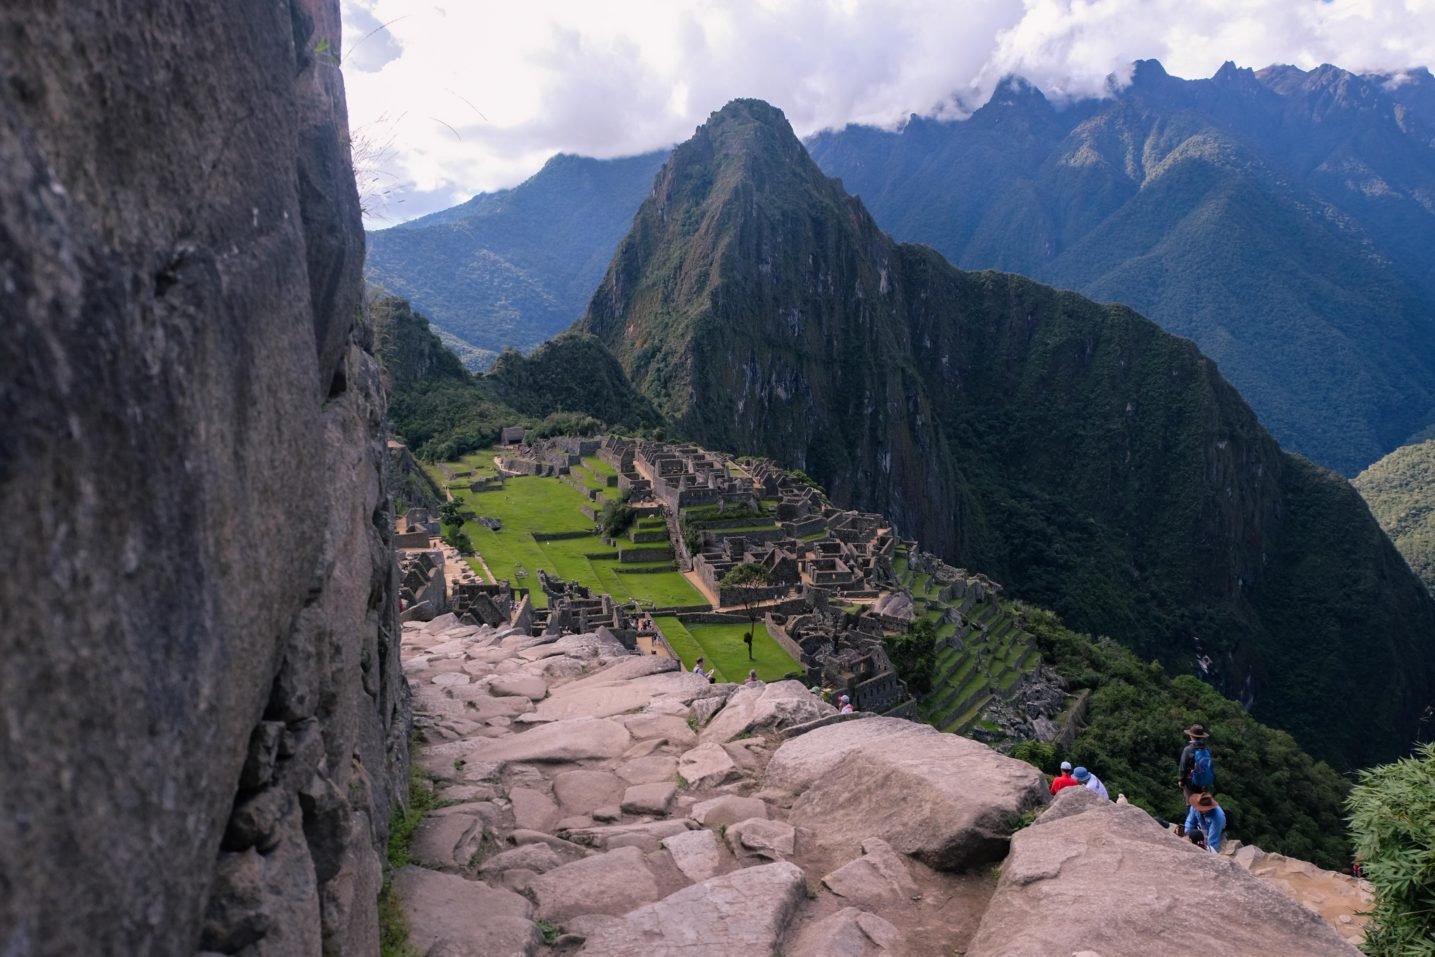 Travel to Peru with The Jetsetter Diaries